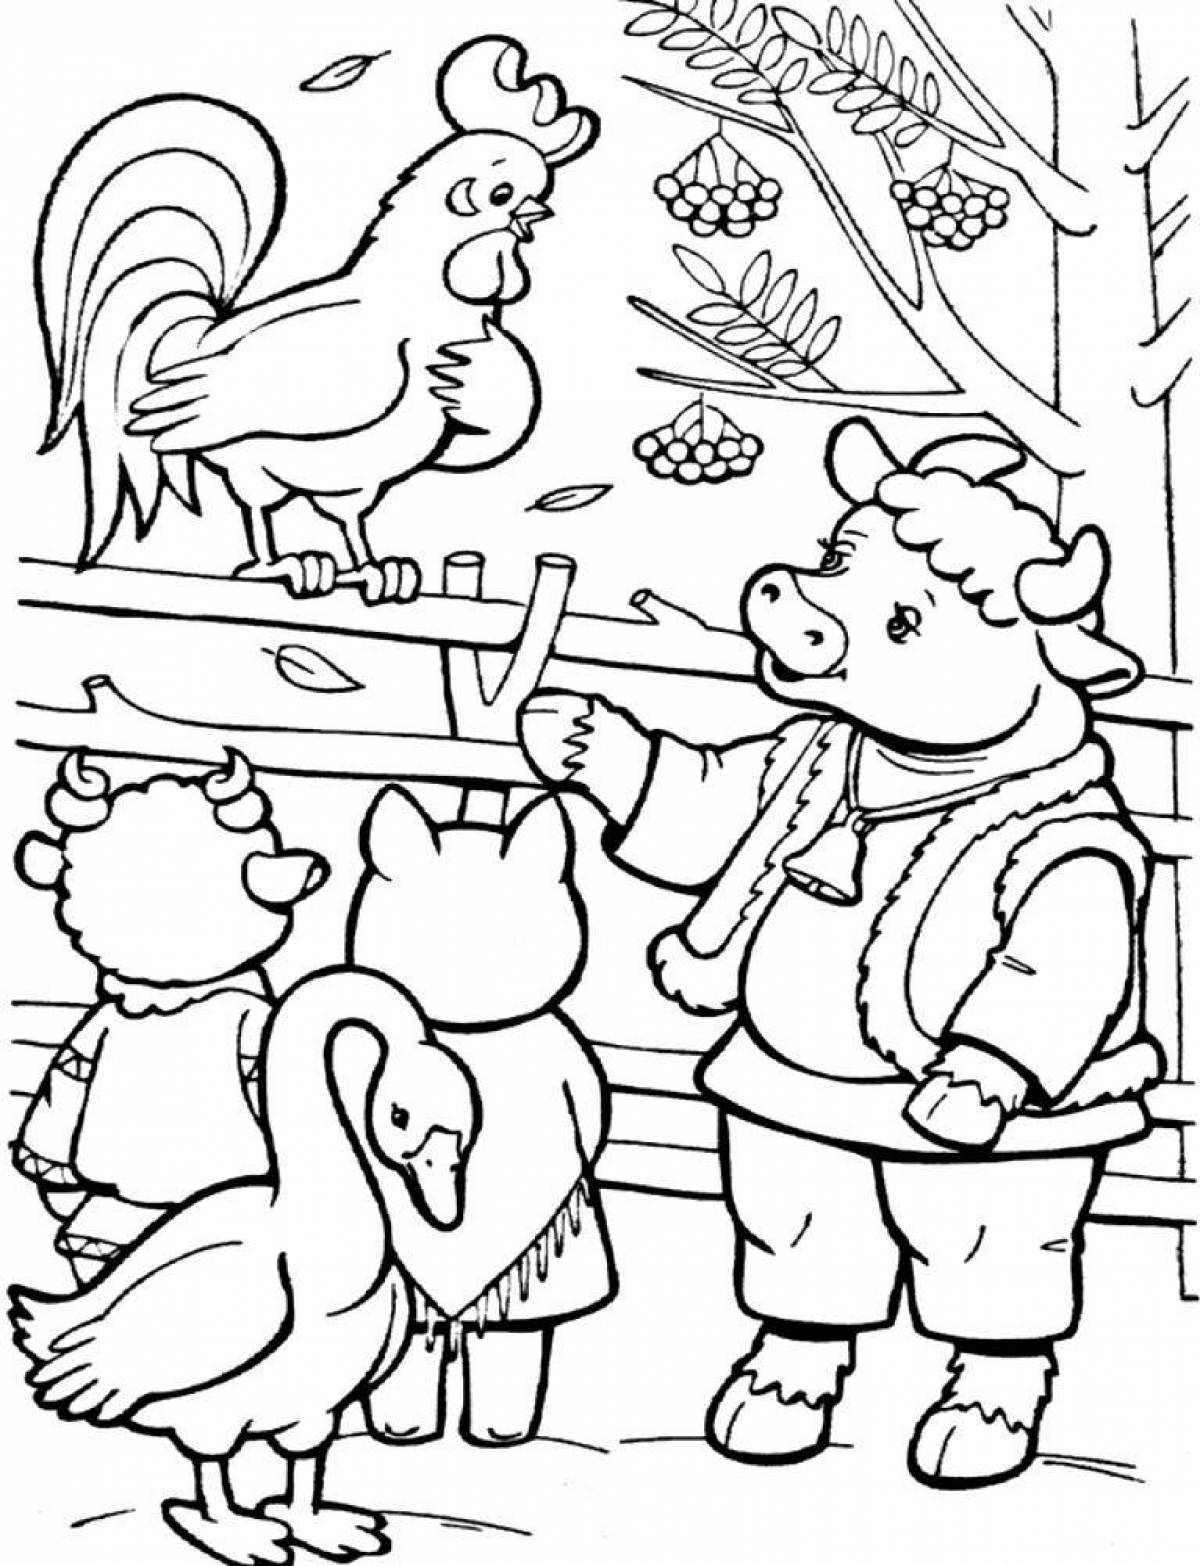 Large coloring book winter hut of animals Russian folk tale